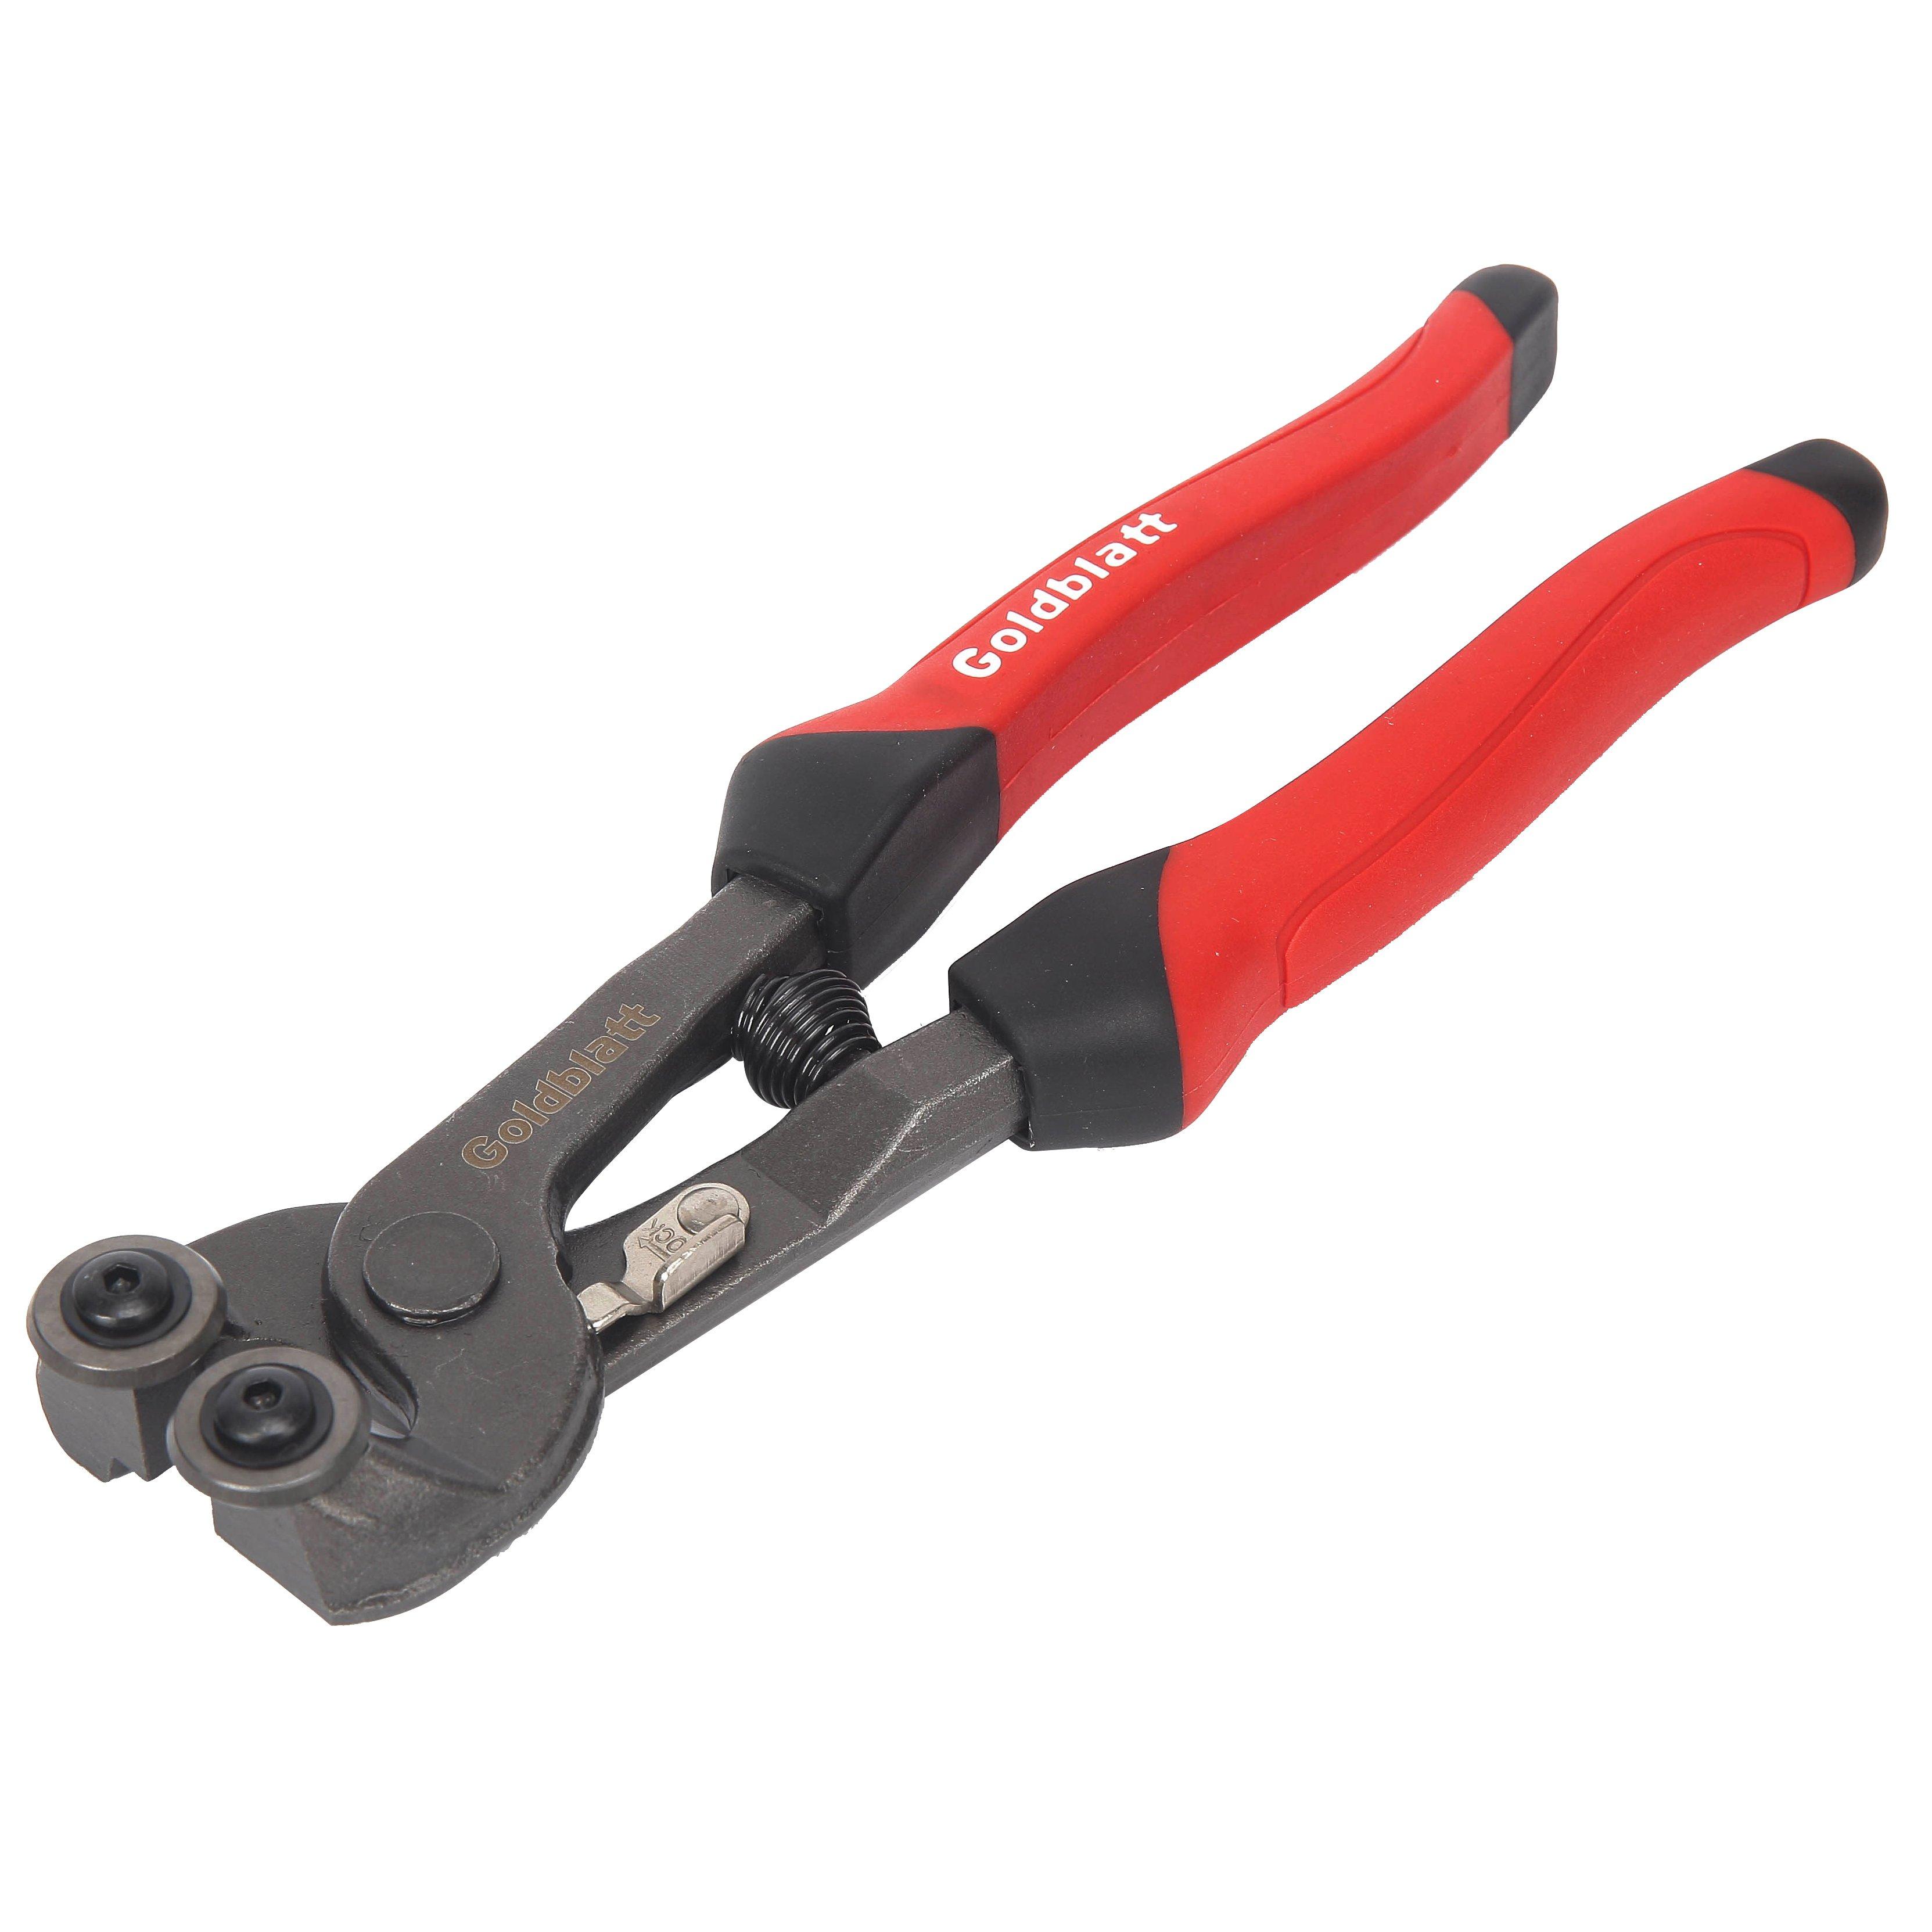 Pro Glass Tile Nippers - Tile Nippers and Tile Cutters